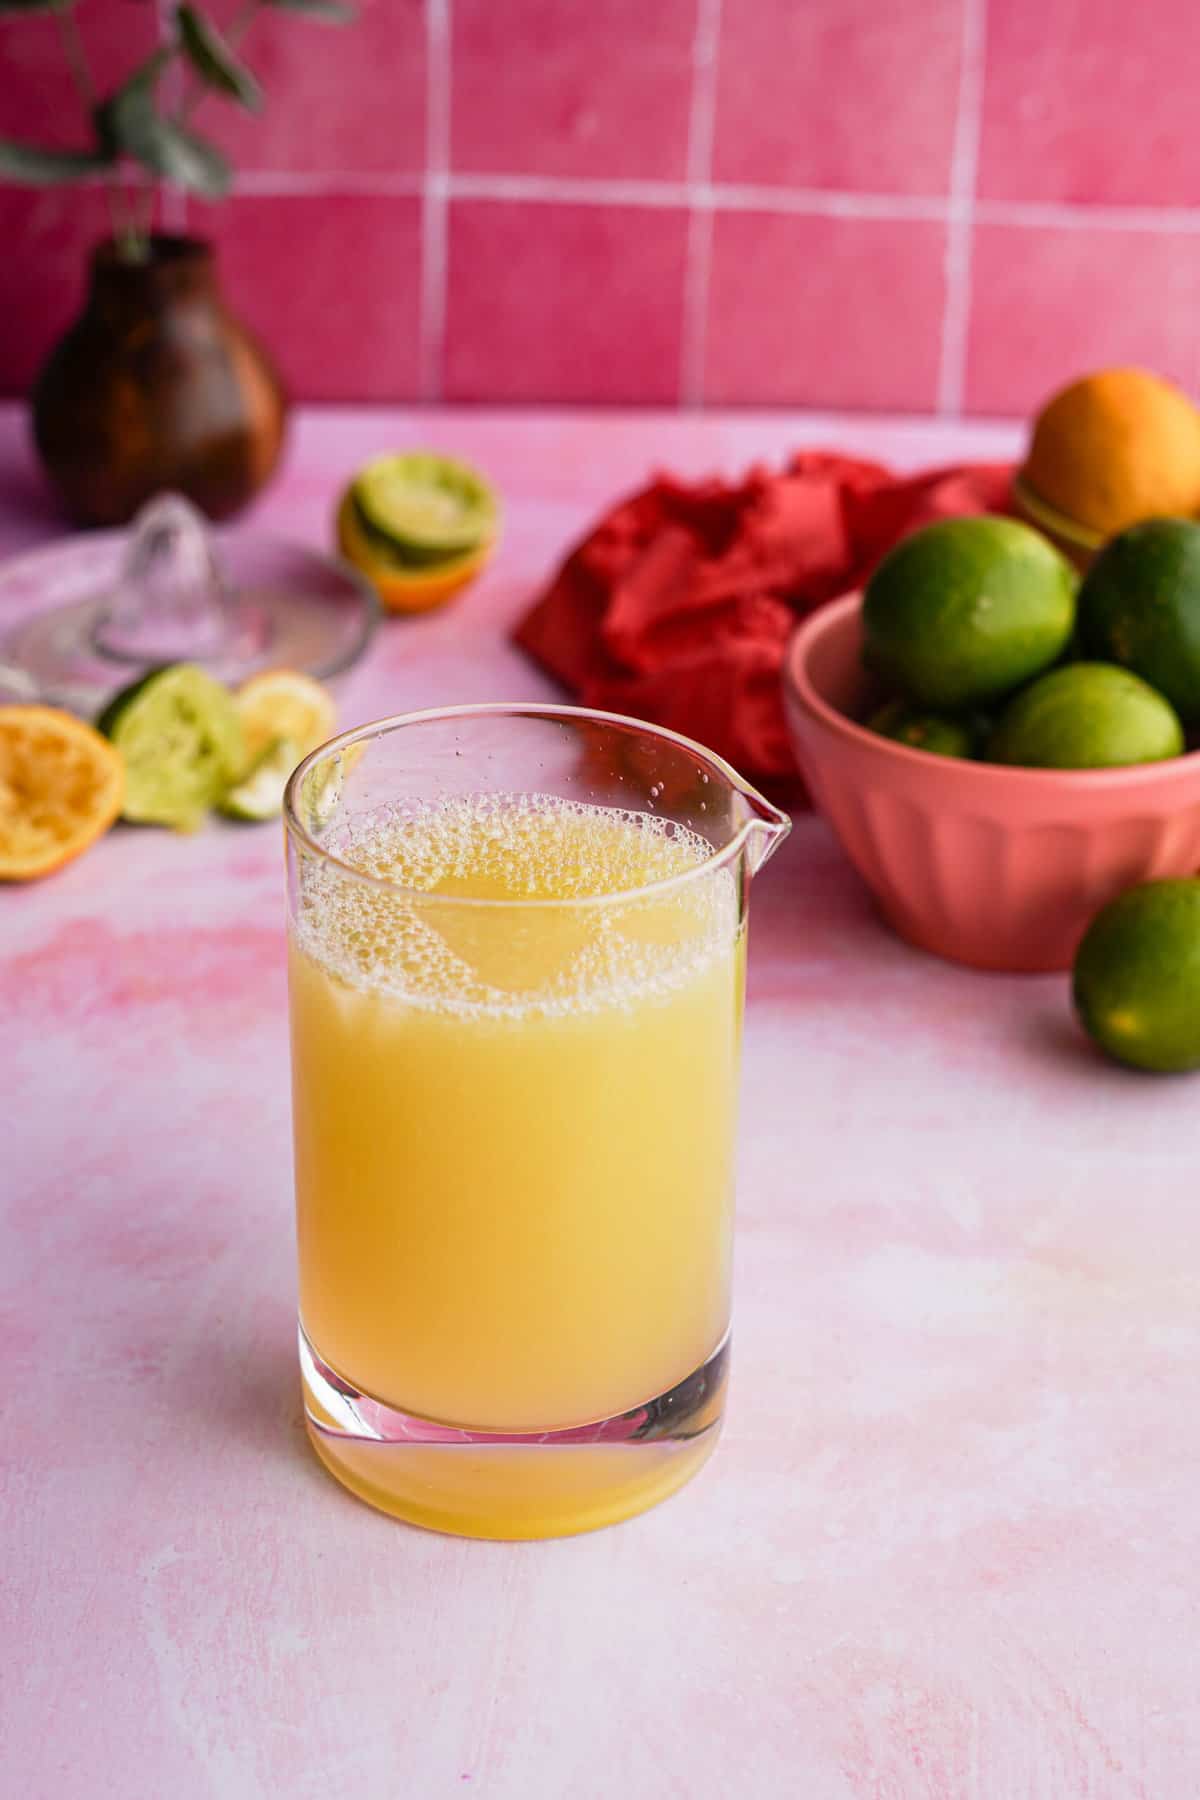 A cocktail mixing glass is full of a batch of homemade sweet and sour mix, sitting in front of bowls of lemons and limes.